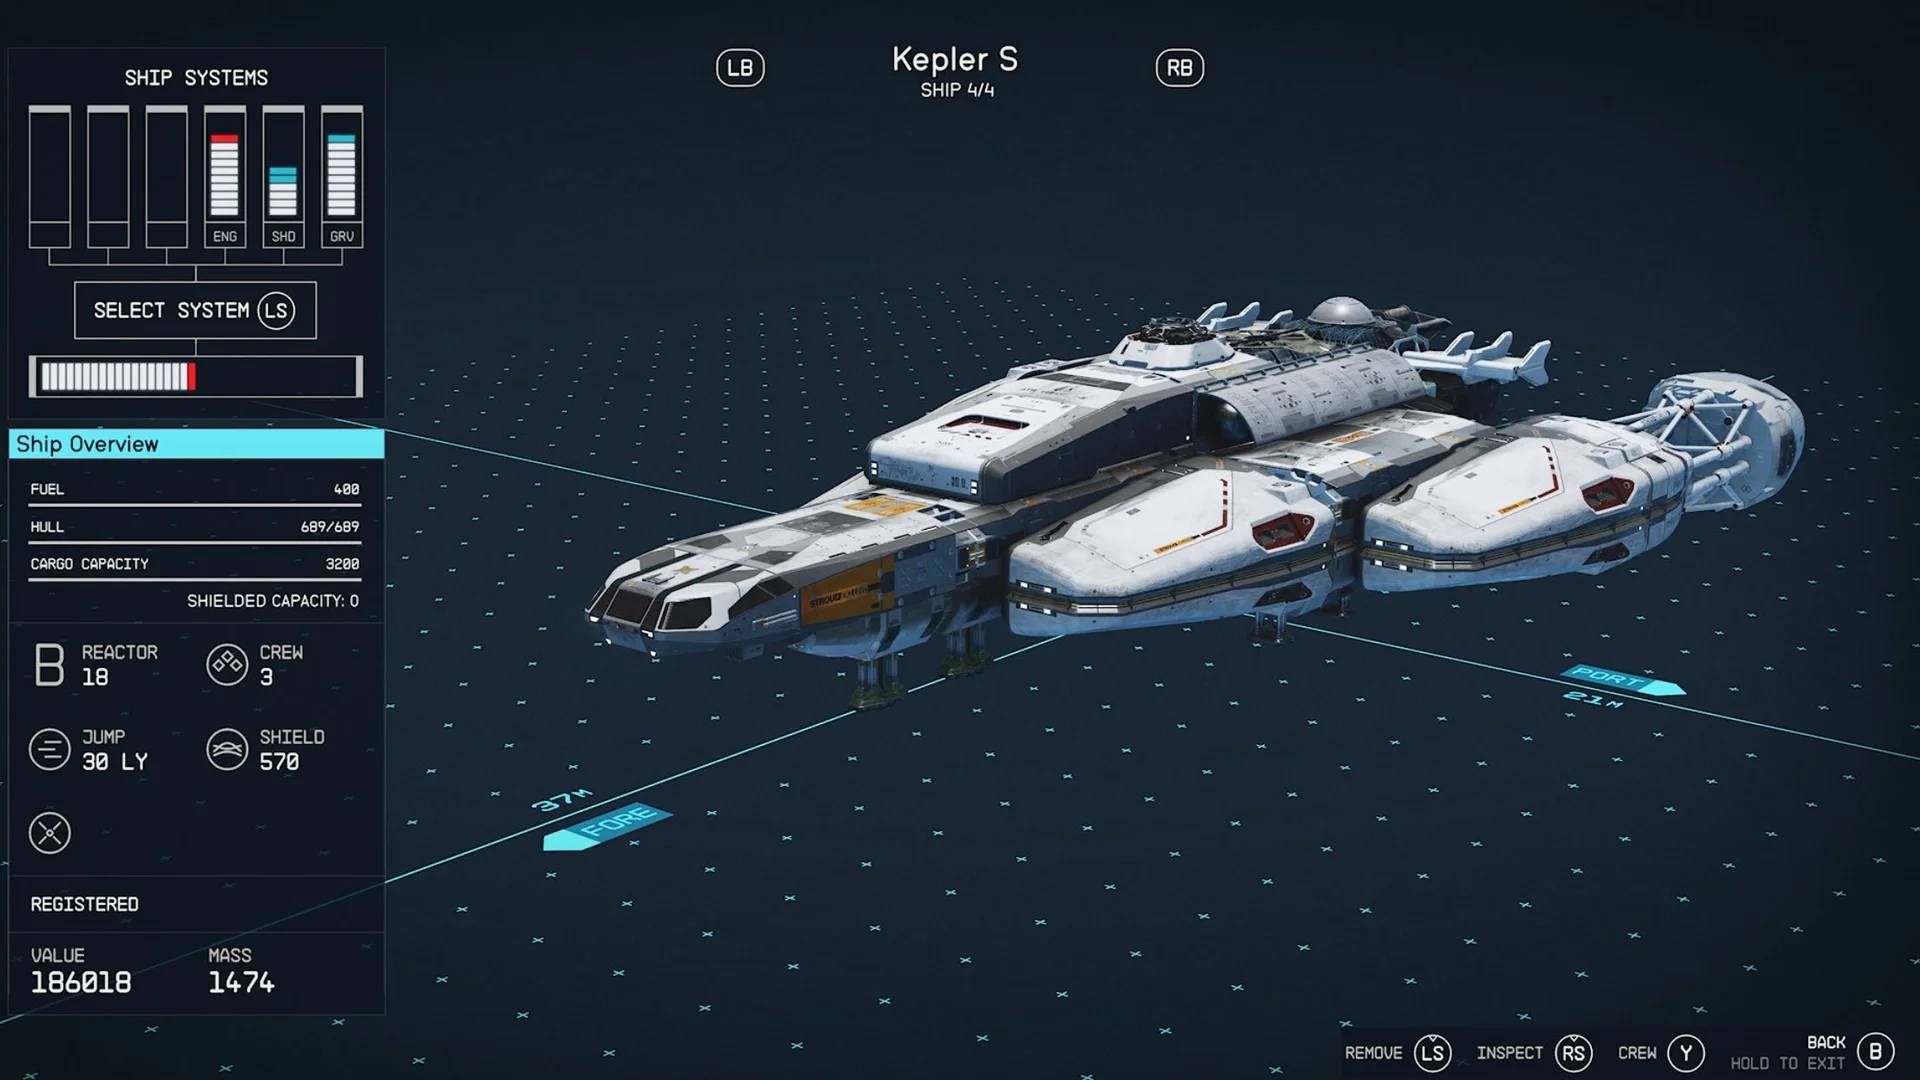 The stats and specs for the Kepler S ship in Starfield.